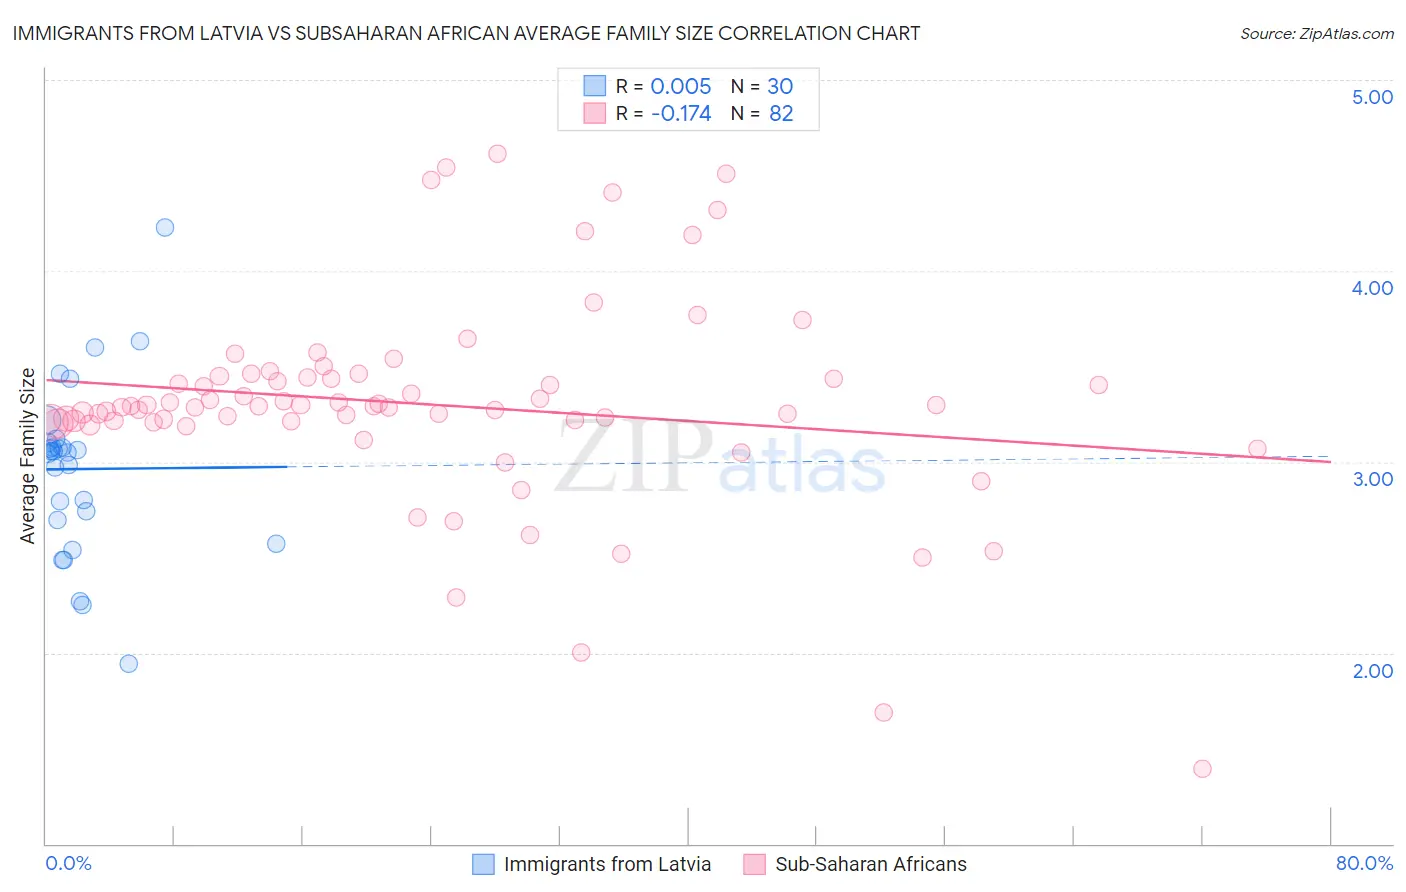 Immigrants from Latvia vs Subsaharan African Average Family Size